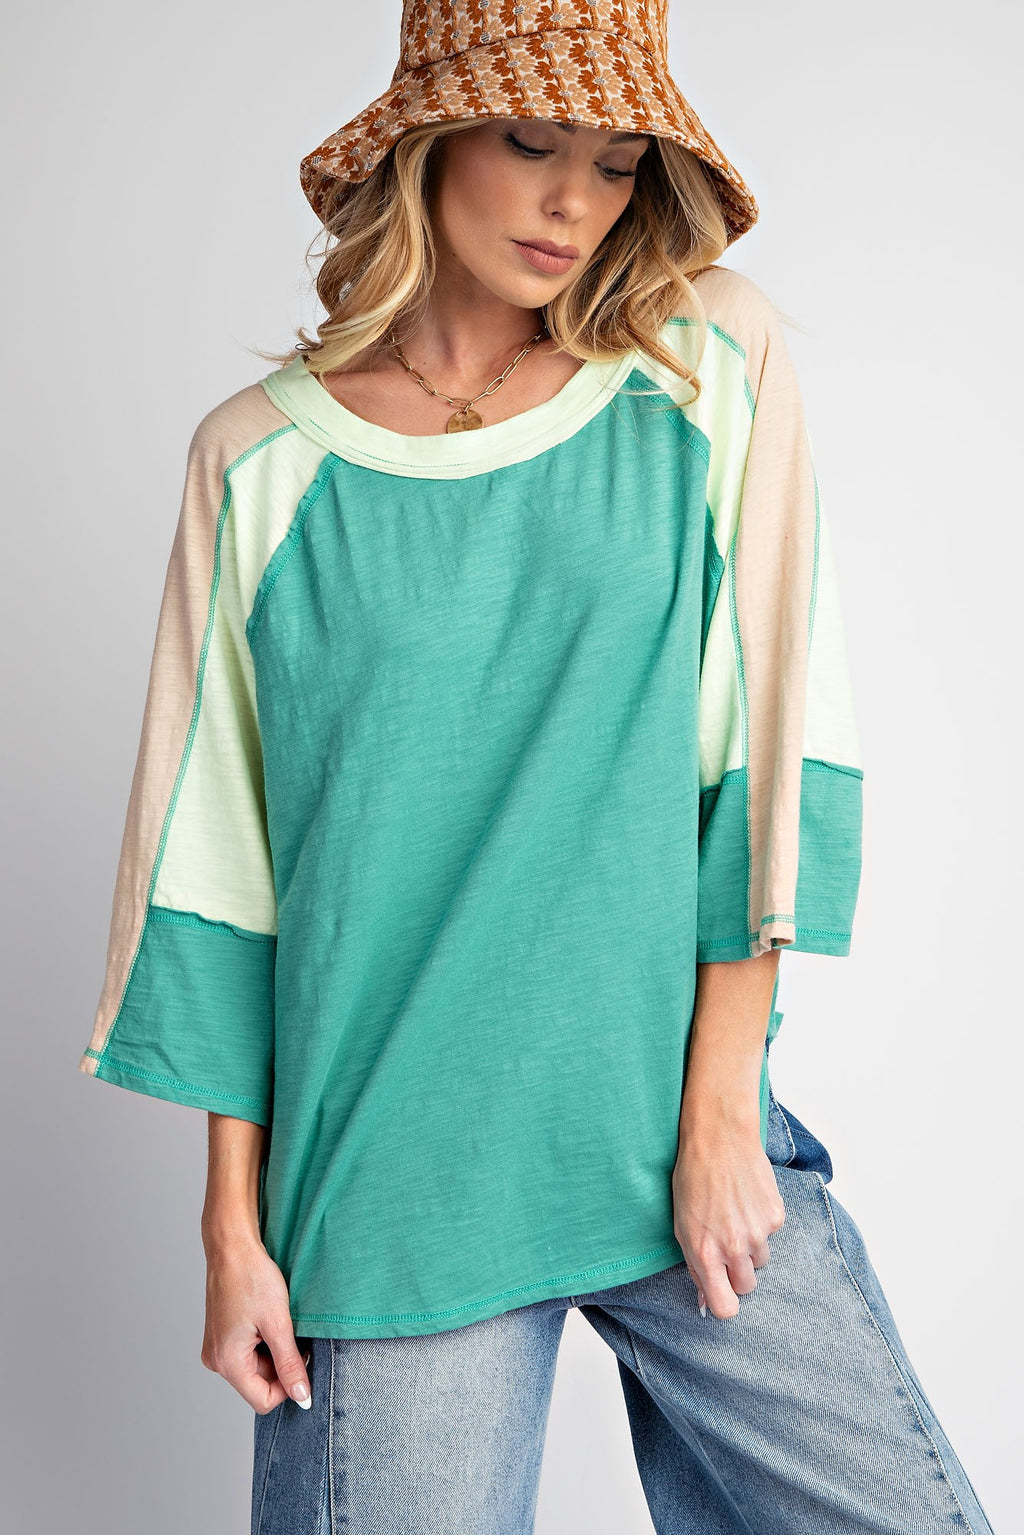 Pacifica Teal Tee